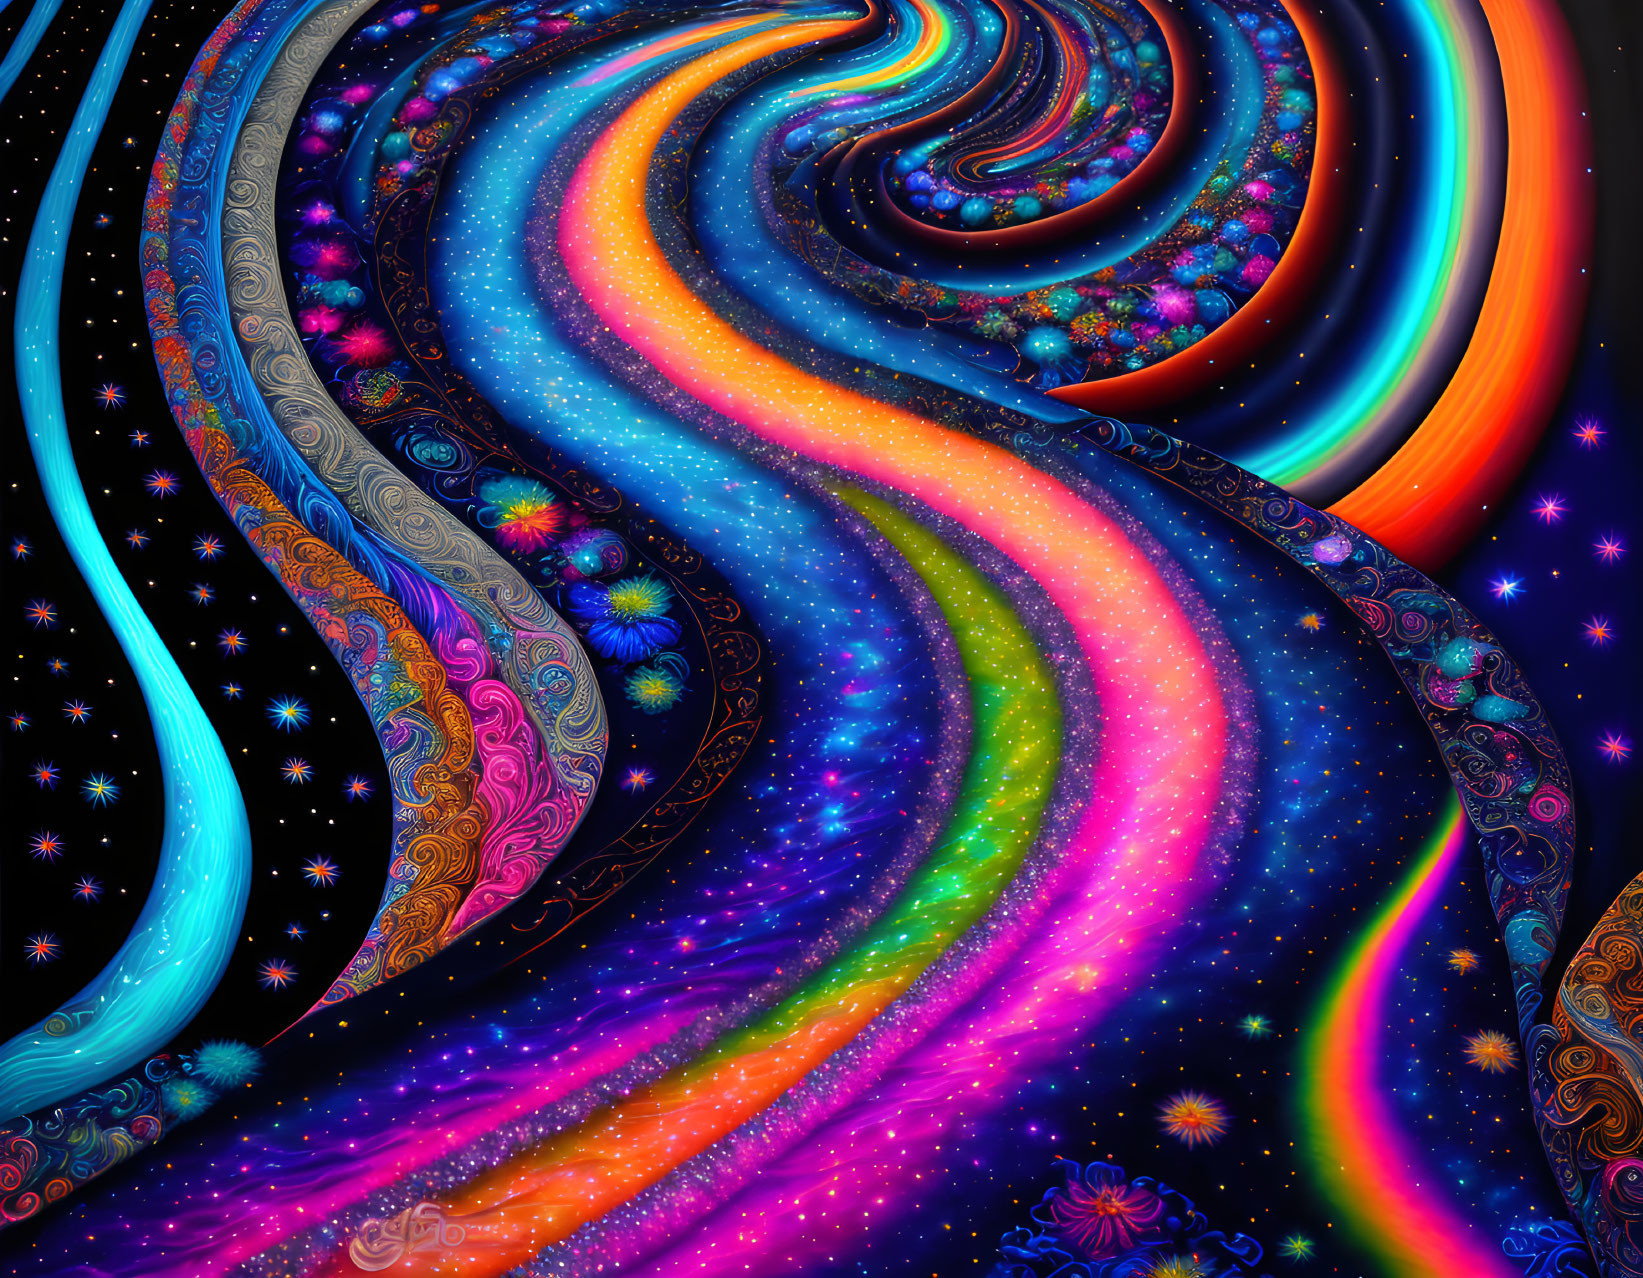 Colorful abstract image with cosmic galaxy swirls and paisley borders